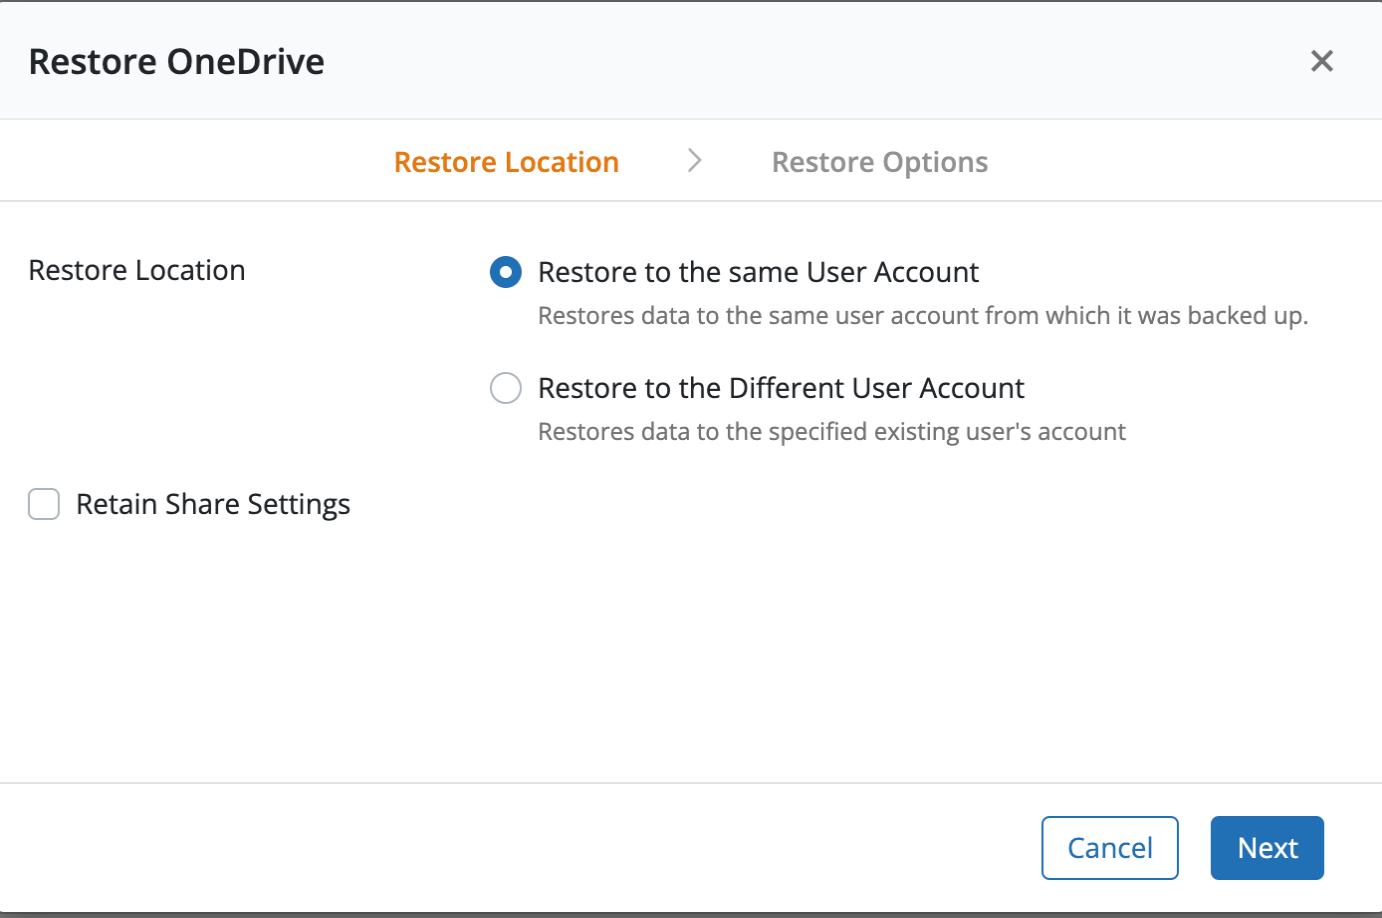 Restore to the same User Account